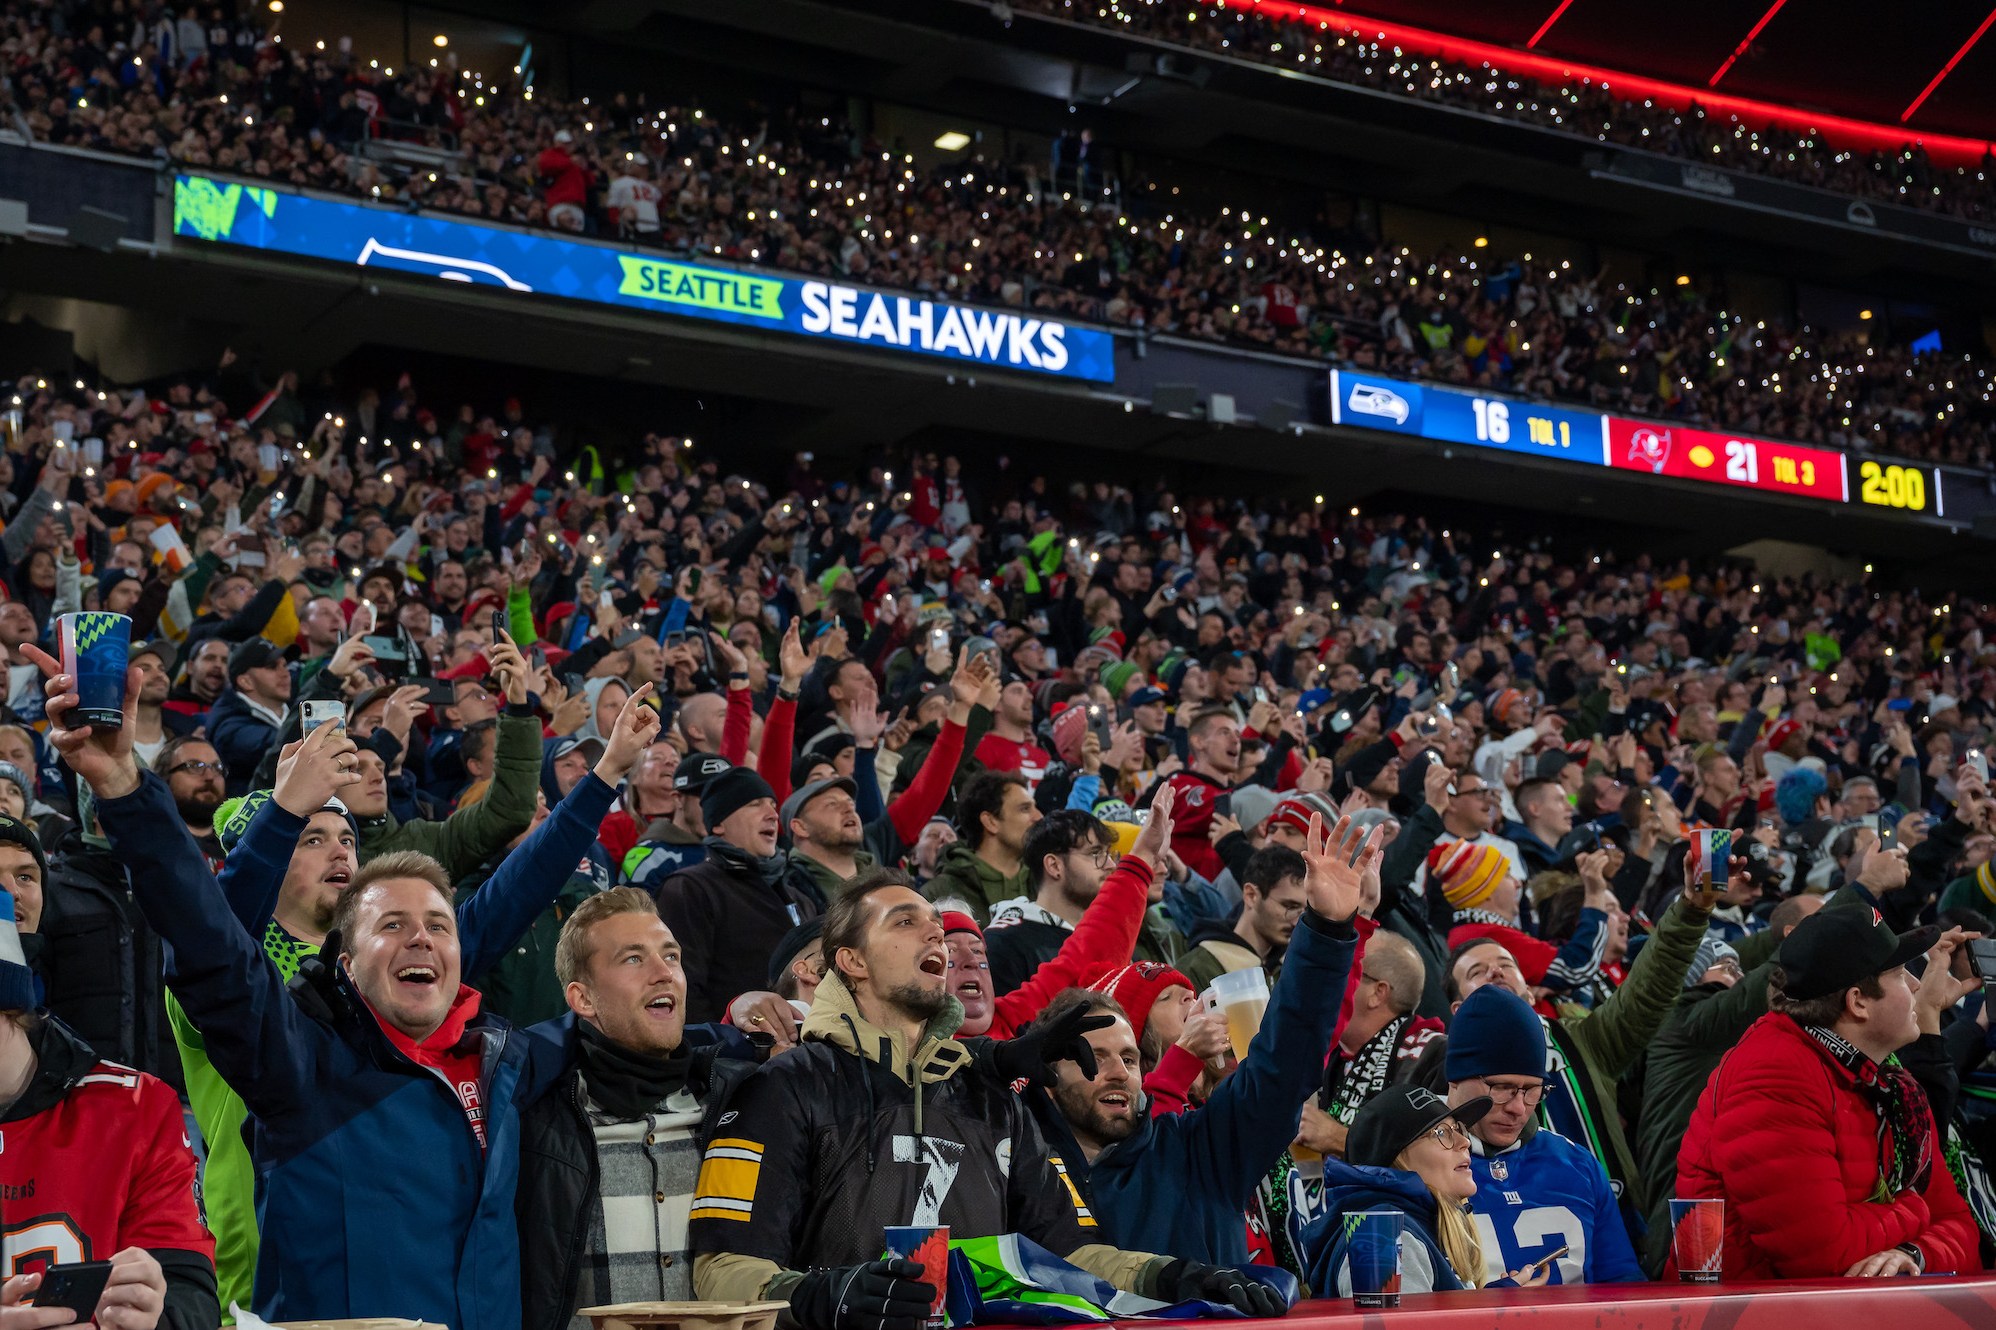 MUNICH, GERMANY - NOVEMBER 13: Fans cheer during the NFL match between Seattle Seahawks and Tampa Bay Buccaneers at Allianz Arena on November 13, 2022 in Munich, Germany. (Photo by Sebastian Widmann/Getty Images)